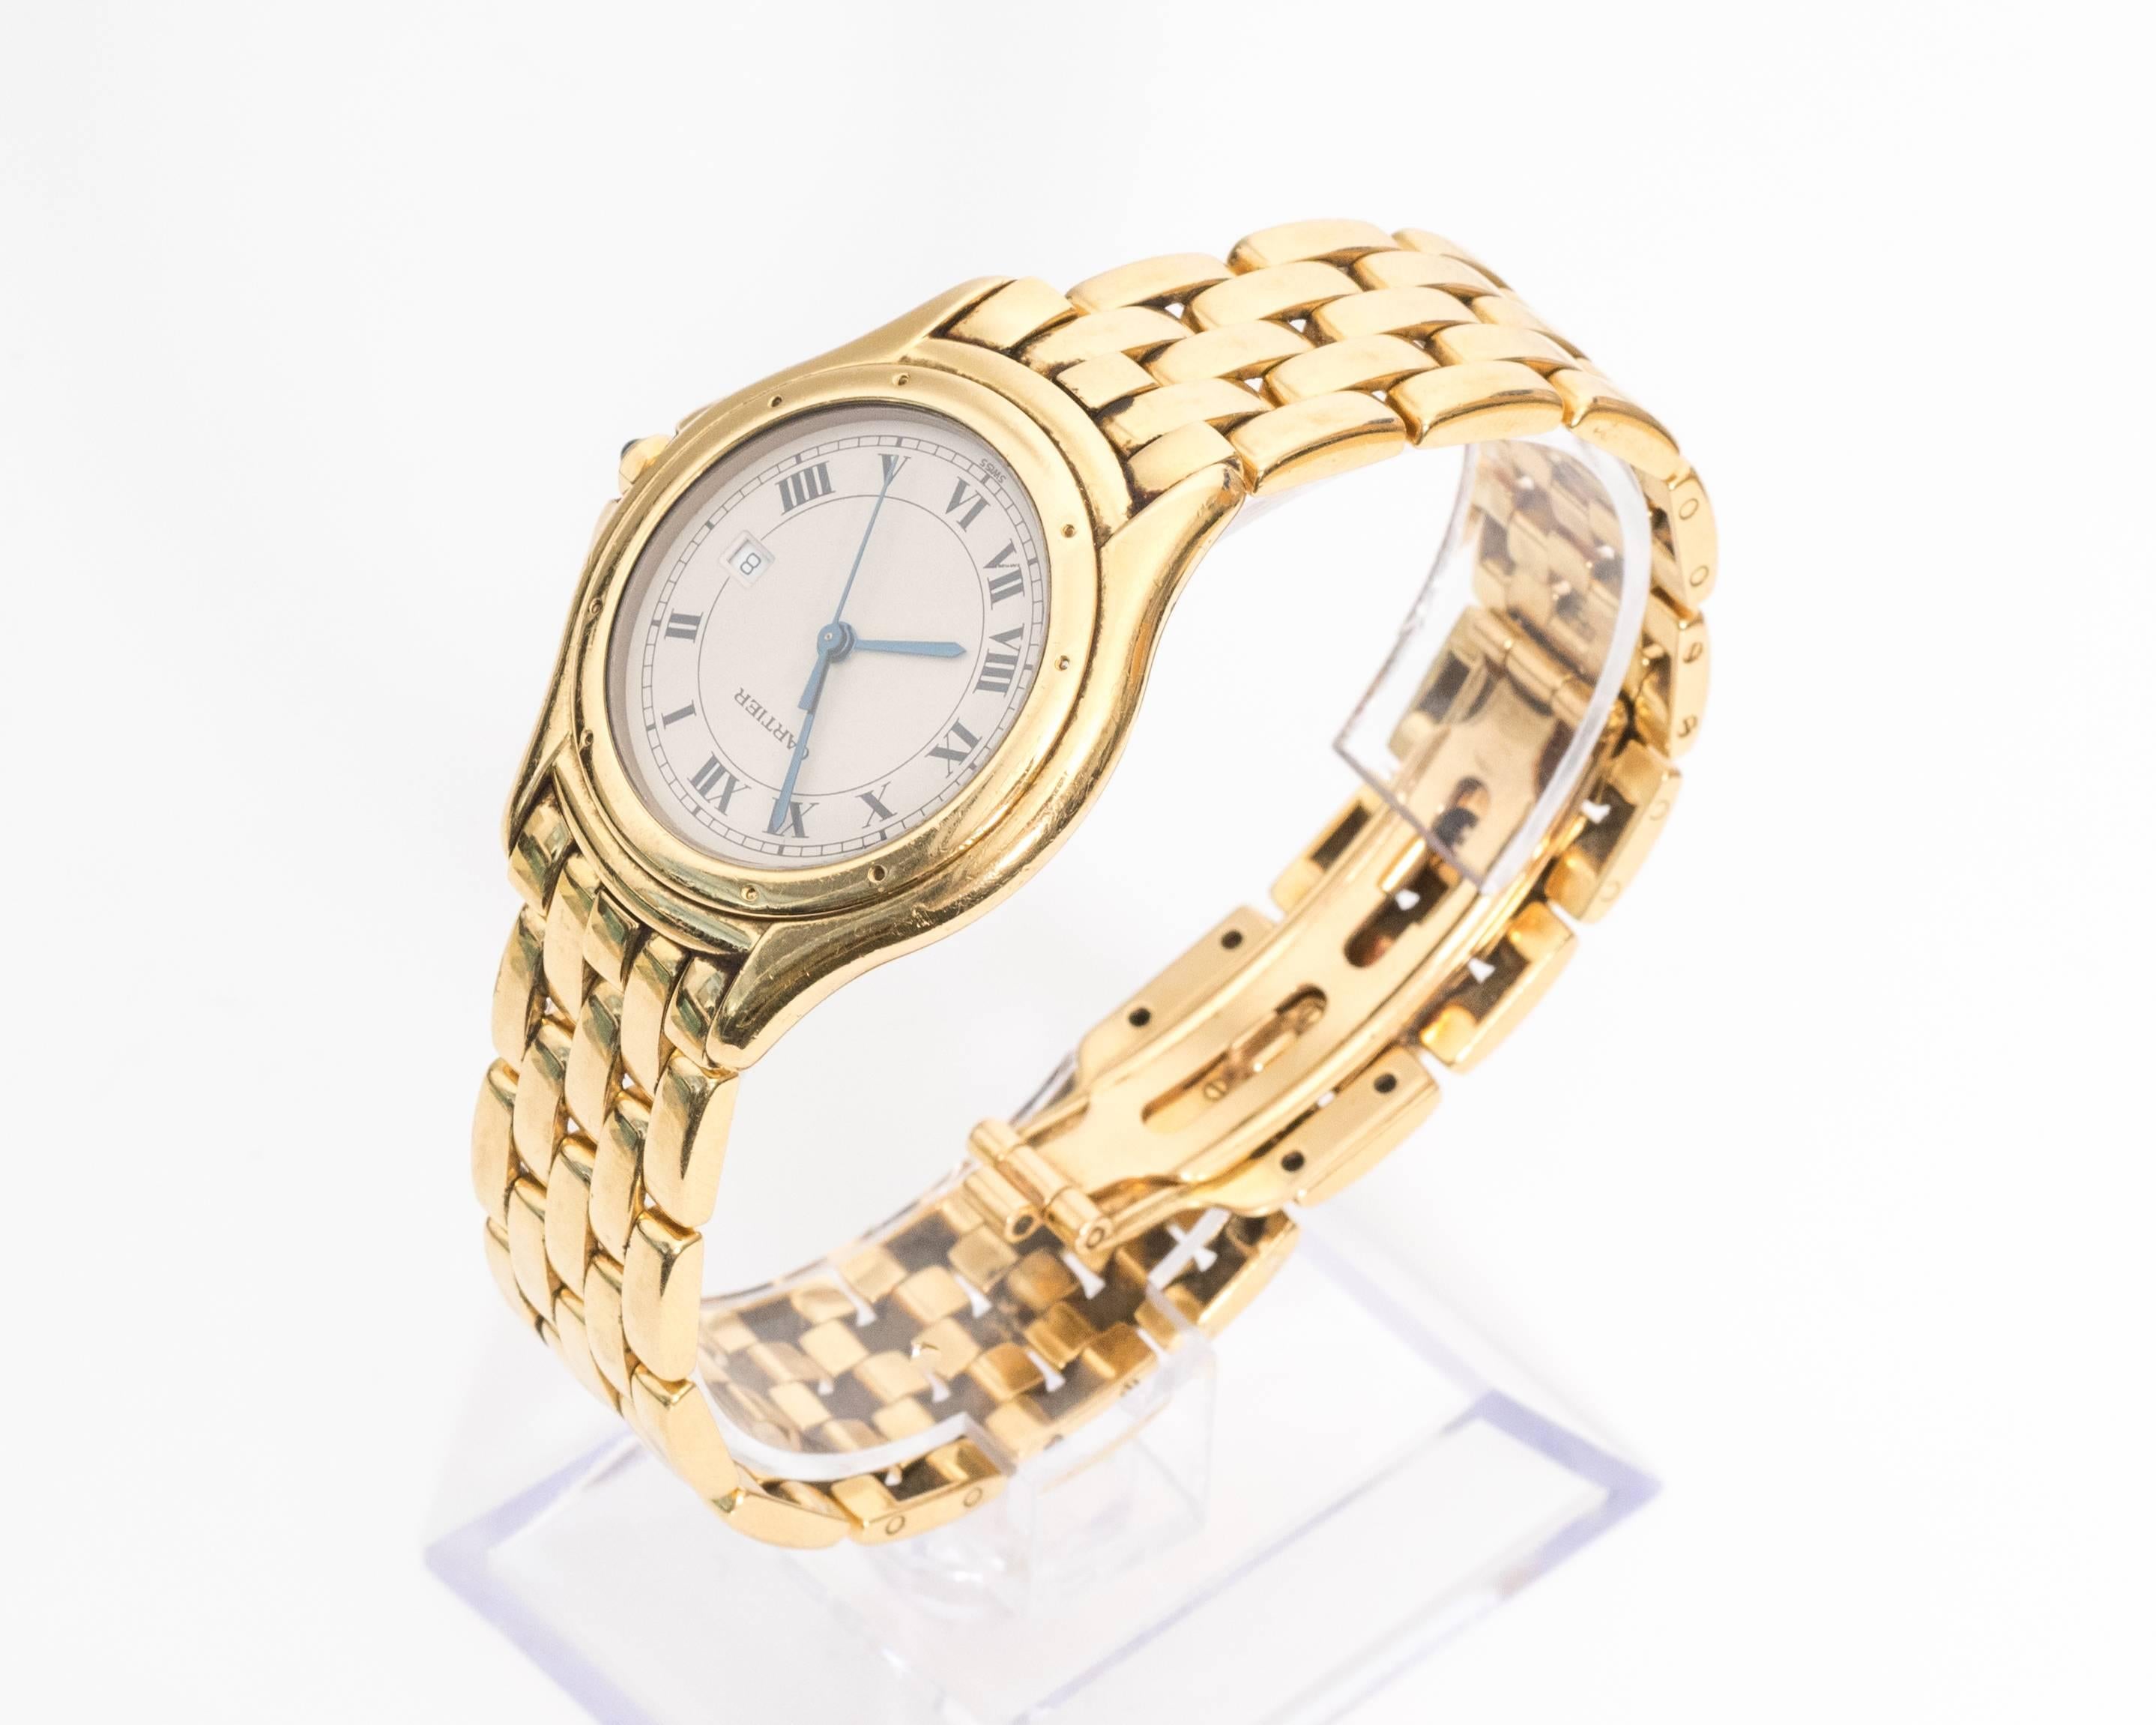 1980s Cartier Cougar Wrist watch
Unisex
18 Karat Yellow Gold
Features Rice Link Bracelet with Butterfly Deployment Clasp
Fits up to 8.5 inch wrist 

Additional Features:
Round 32 millimeter by 36 millimeter case
Rounded Stepped Bezel Secured by